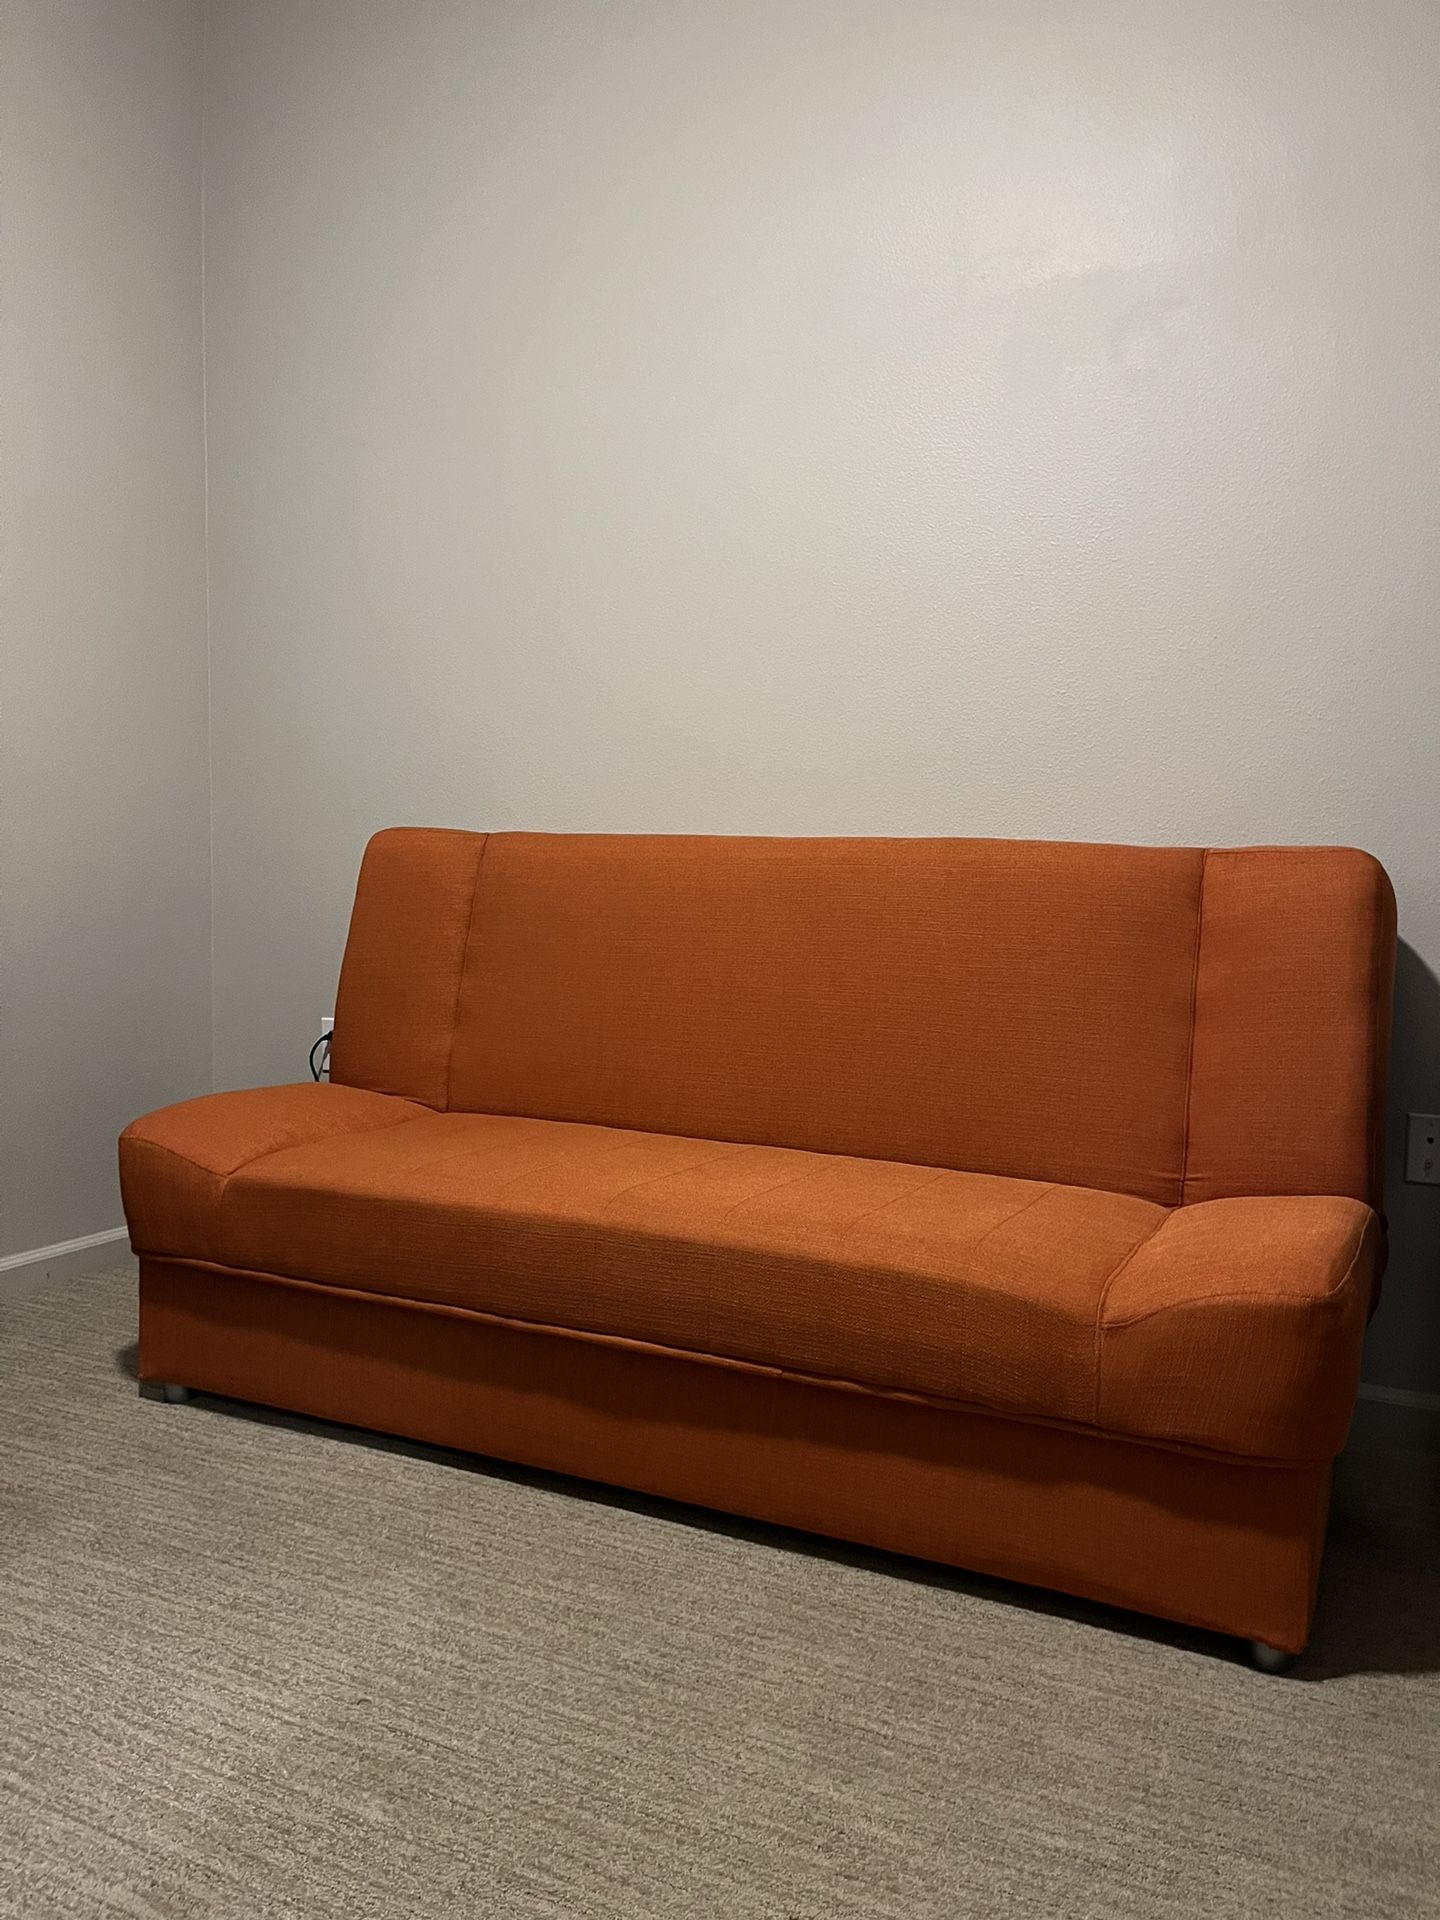 77” Upholstered futon/ with storage underneath. Price Is Negotiable. 